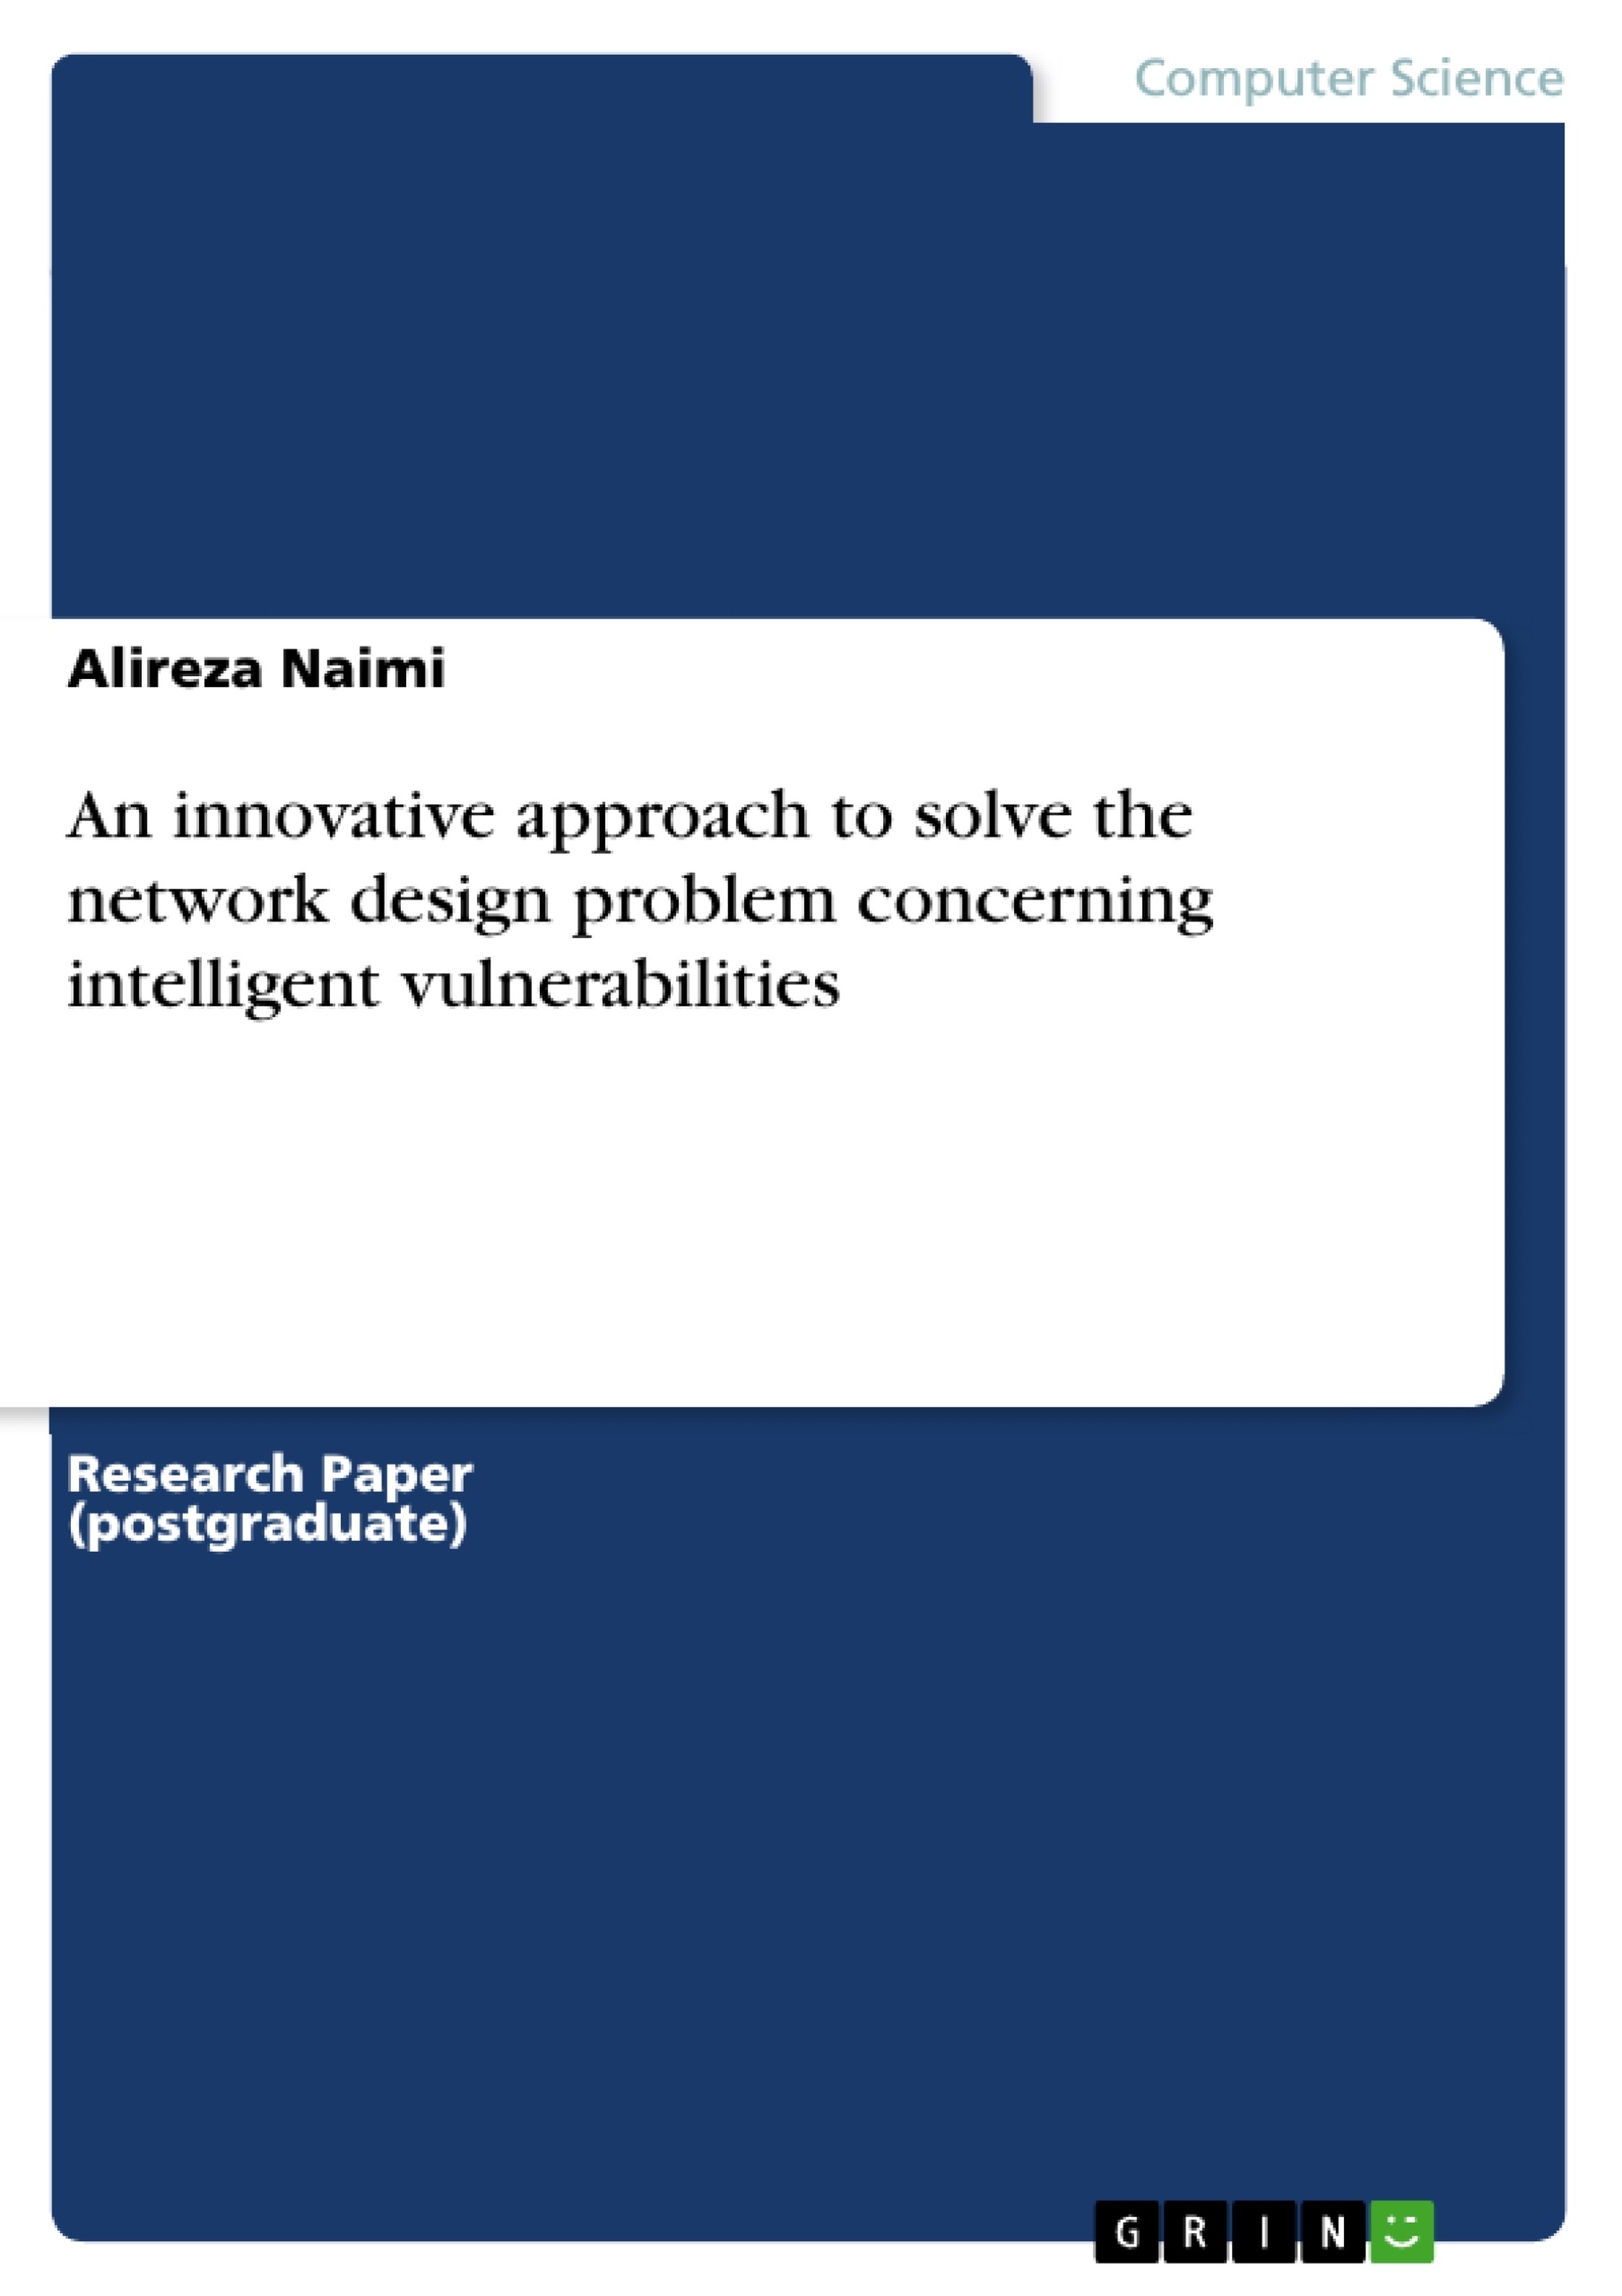 Titre: An innovative approach to solve the network design problem concerning intelligent vulnerabilities